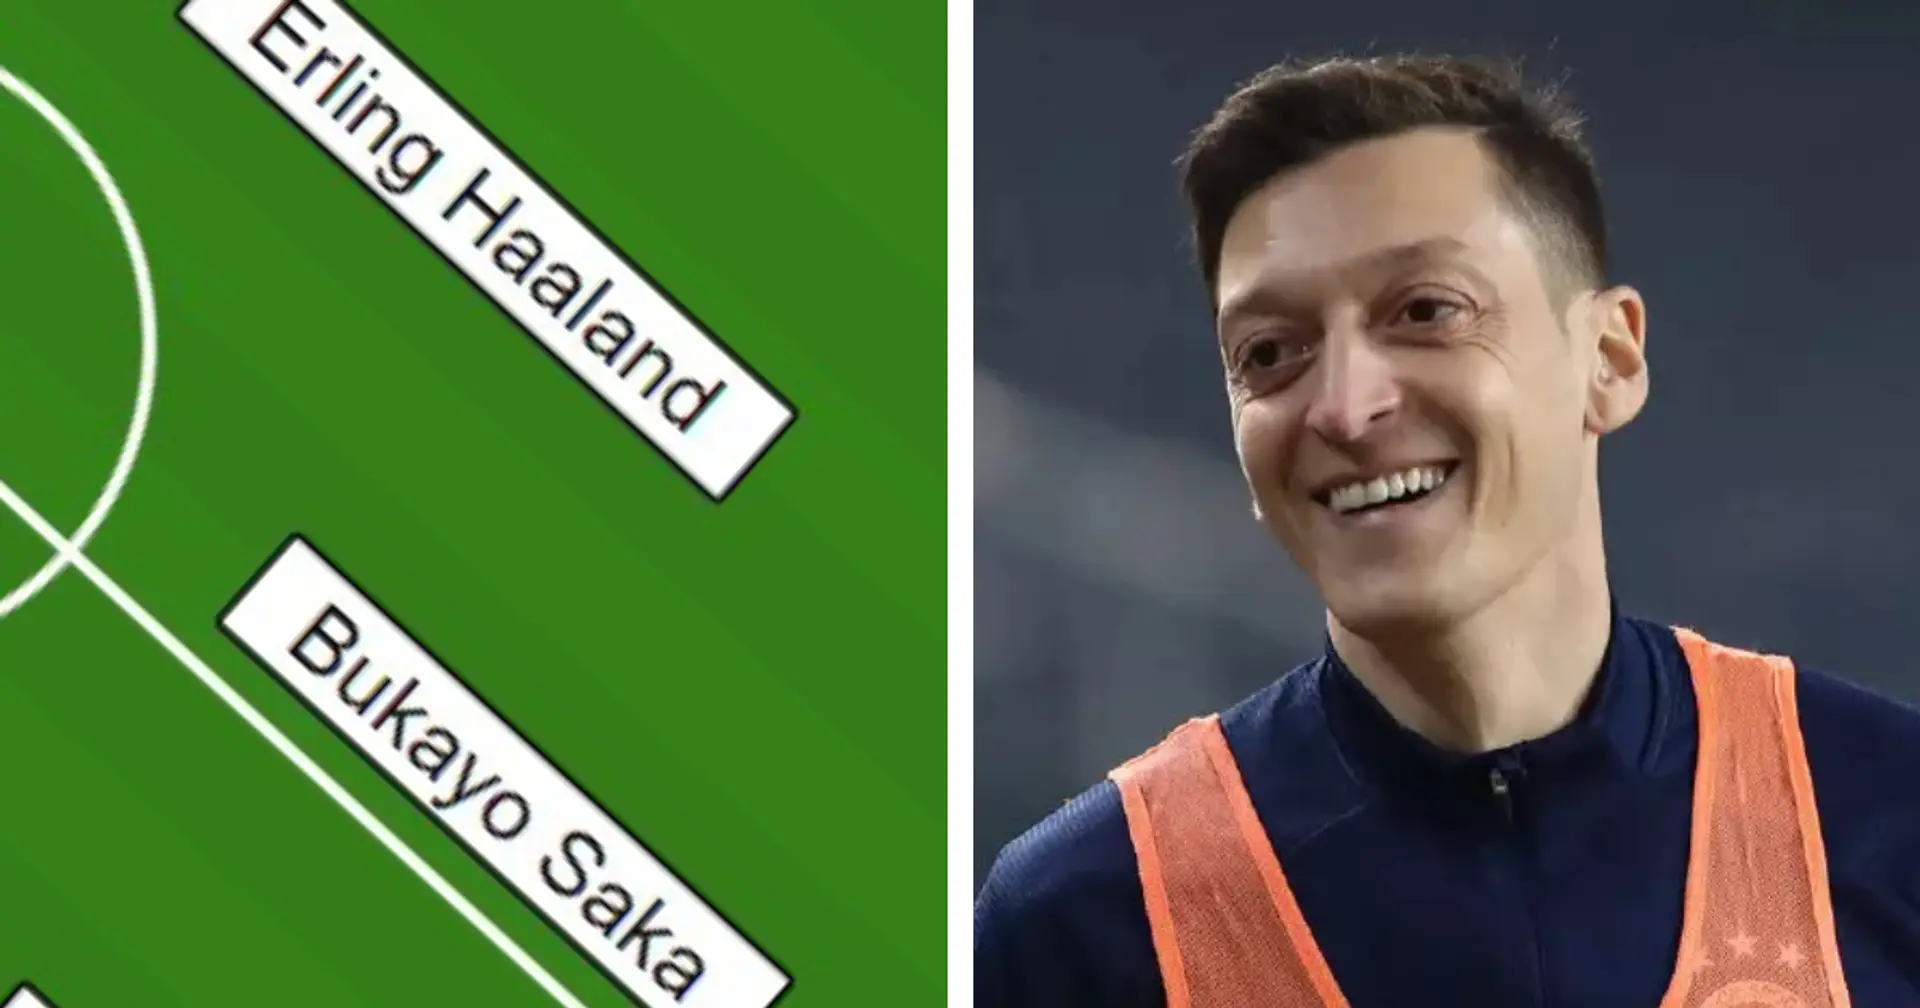 Mesut Ozil includes just one Arsenal player in his Champions League 'dream team'